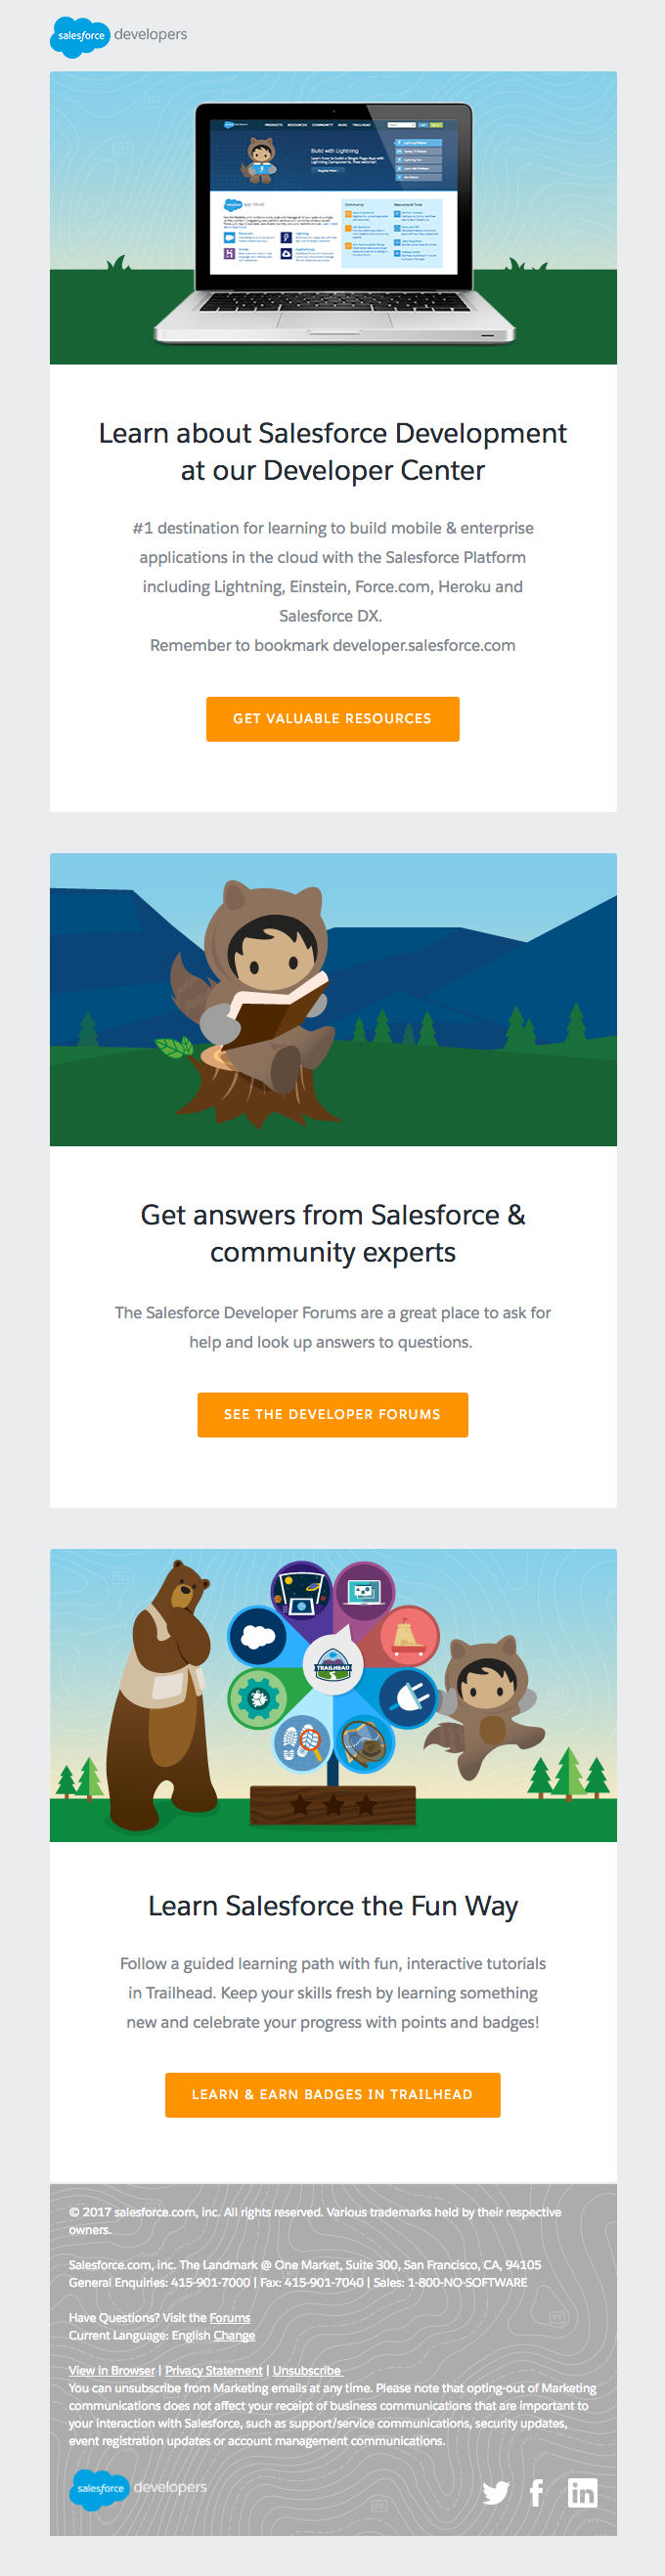 Salesforce Informative email templates